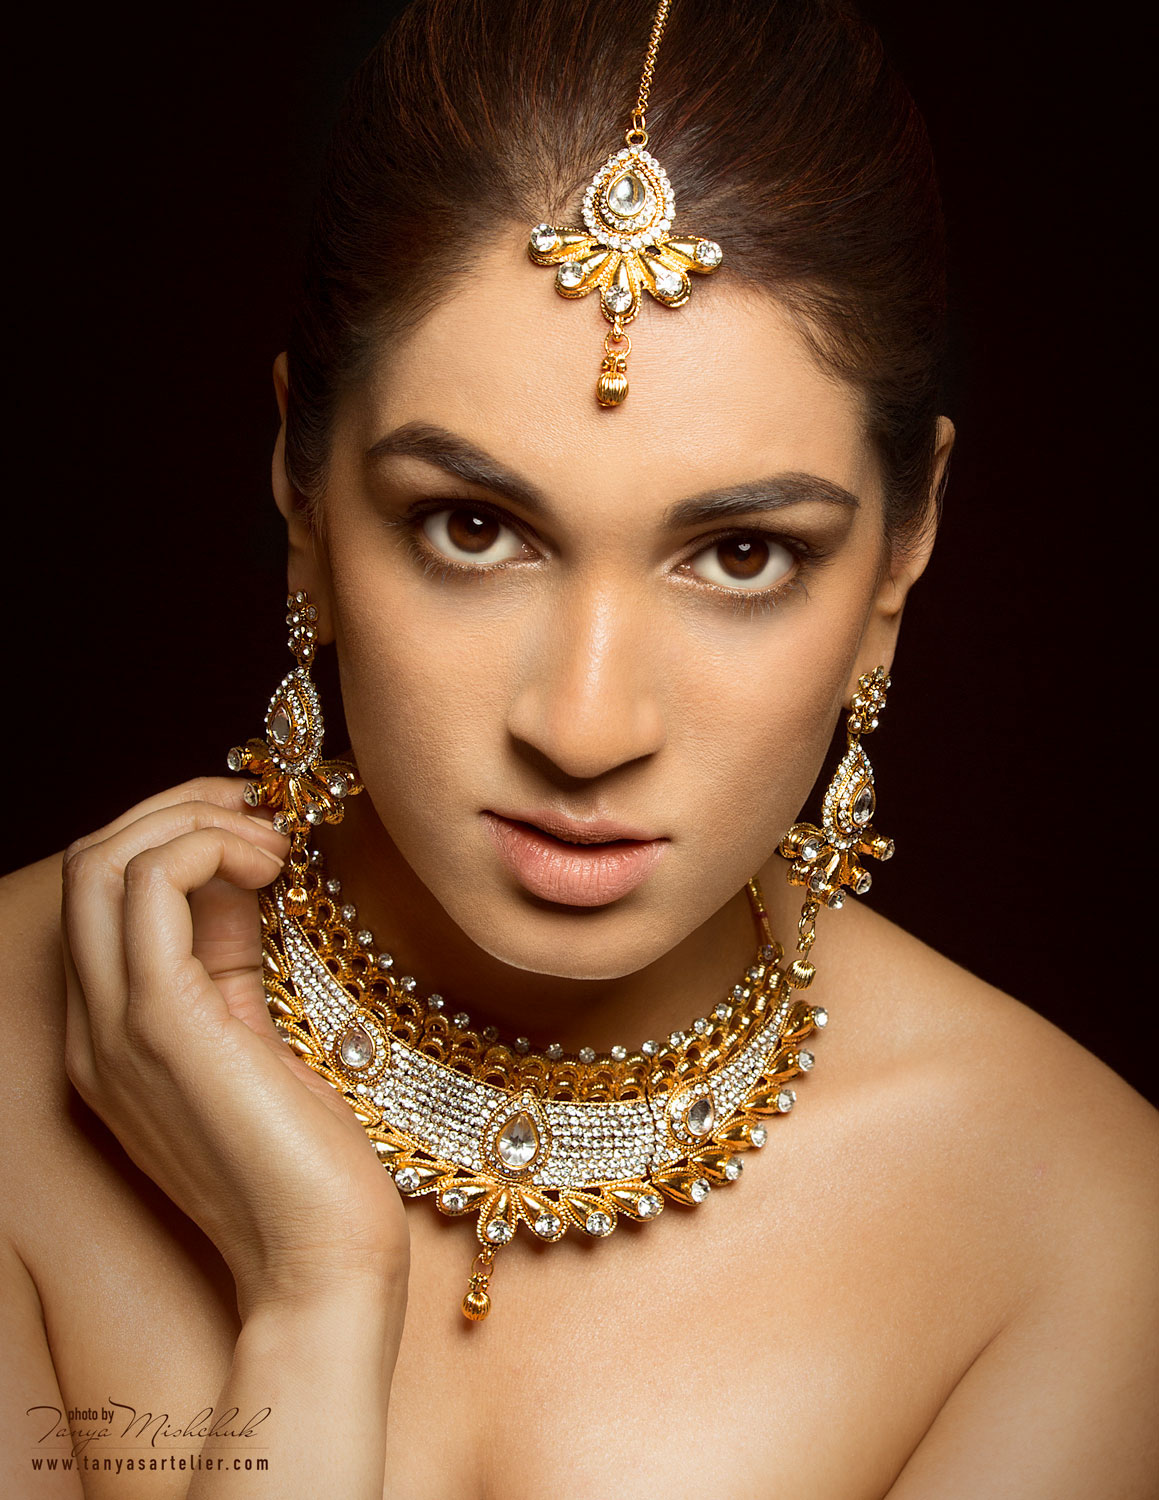 editorial published photographer Jewellery Advertising  indian jewellery photographer auckland photographer nz published work